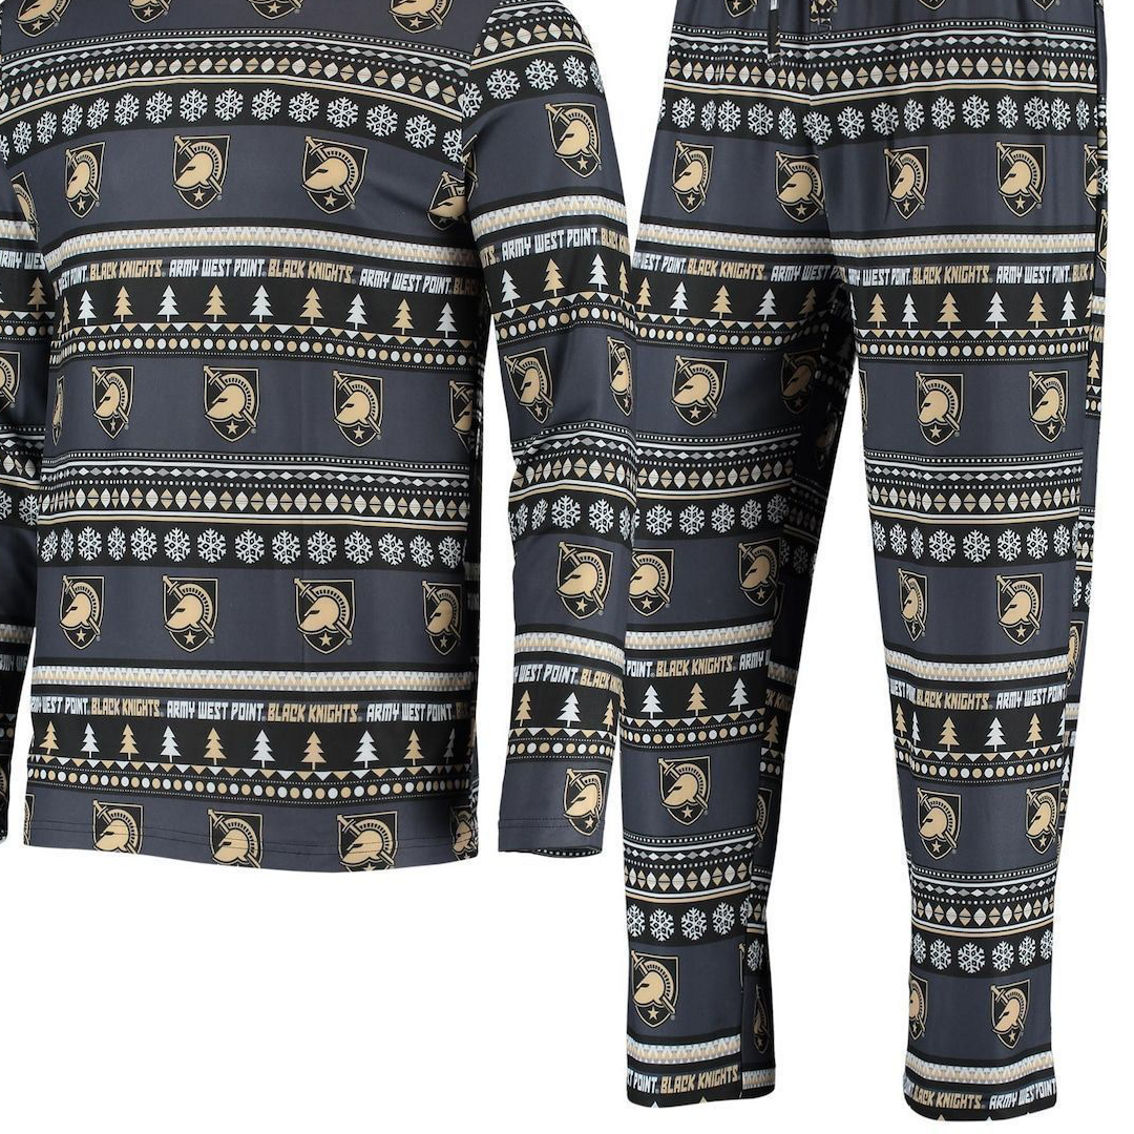 Concepts Sport Men's Black Army Black Knights Ugly Sweater Knit Long Sleeve Top and Pant Set - Image 2 of 4